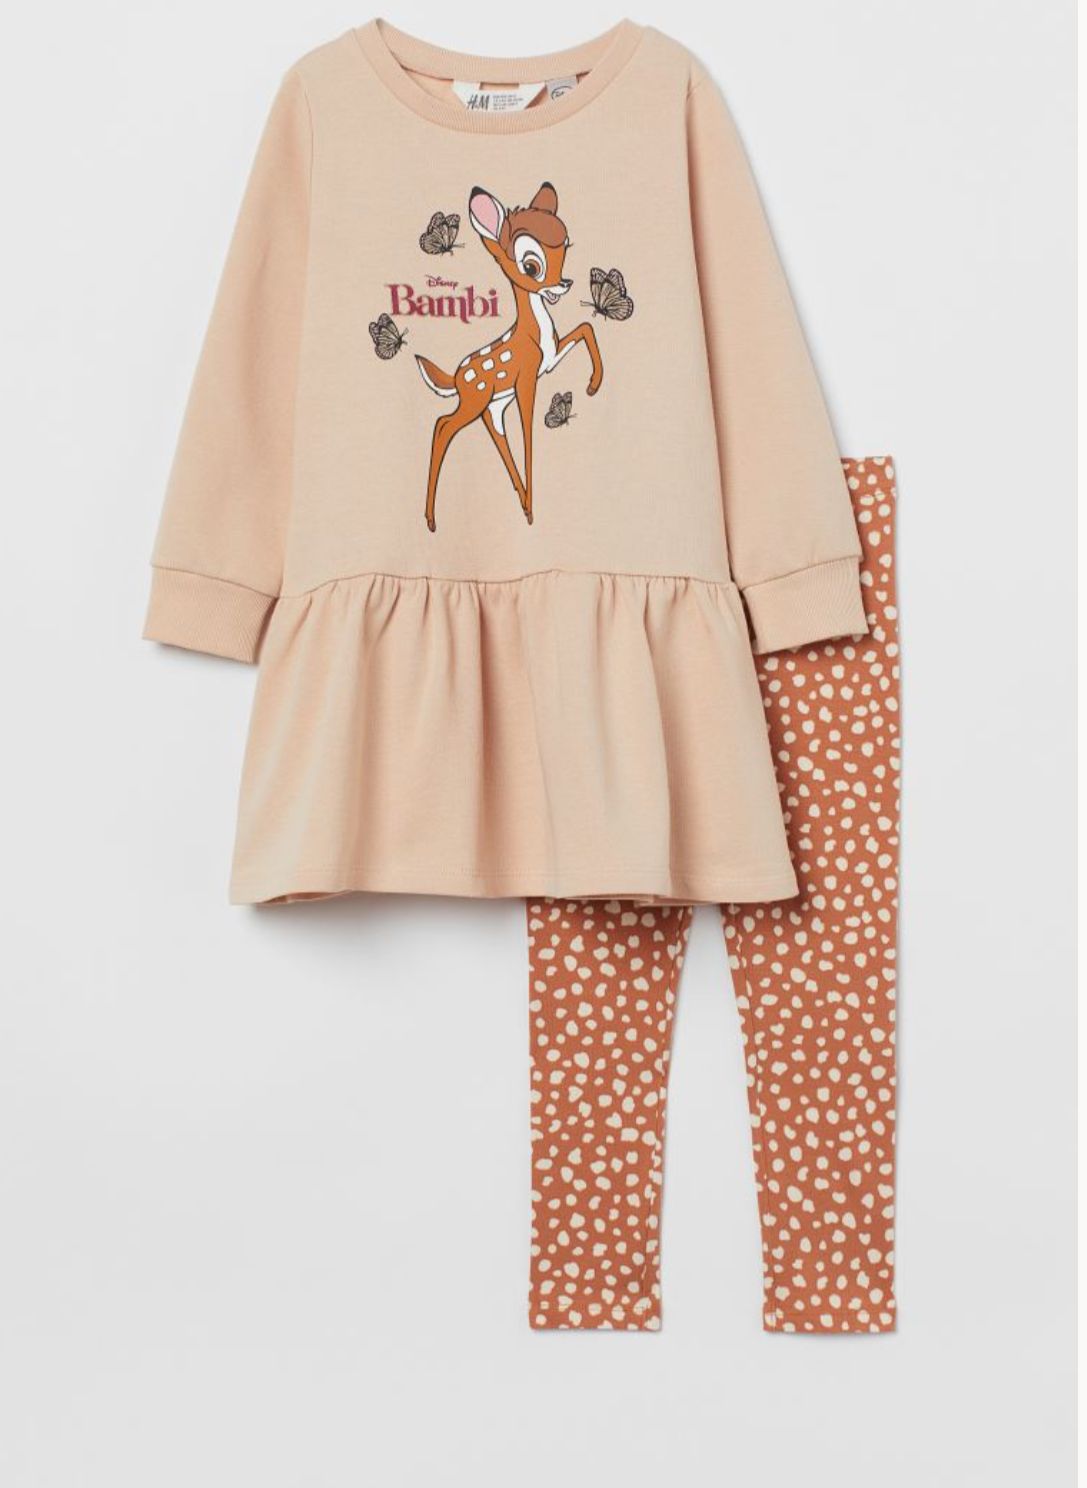 BAMBI outfit